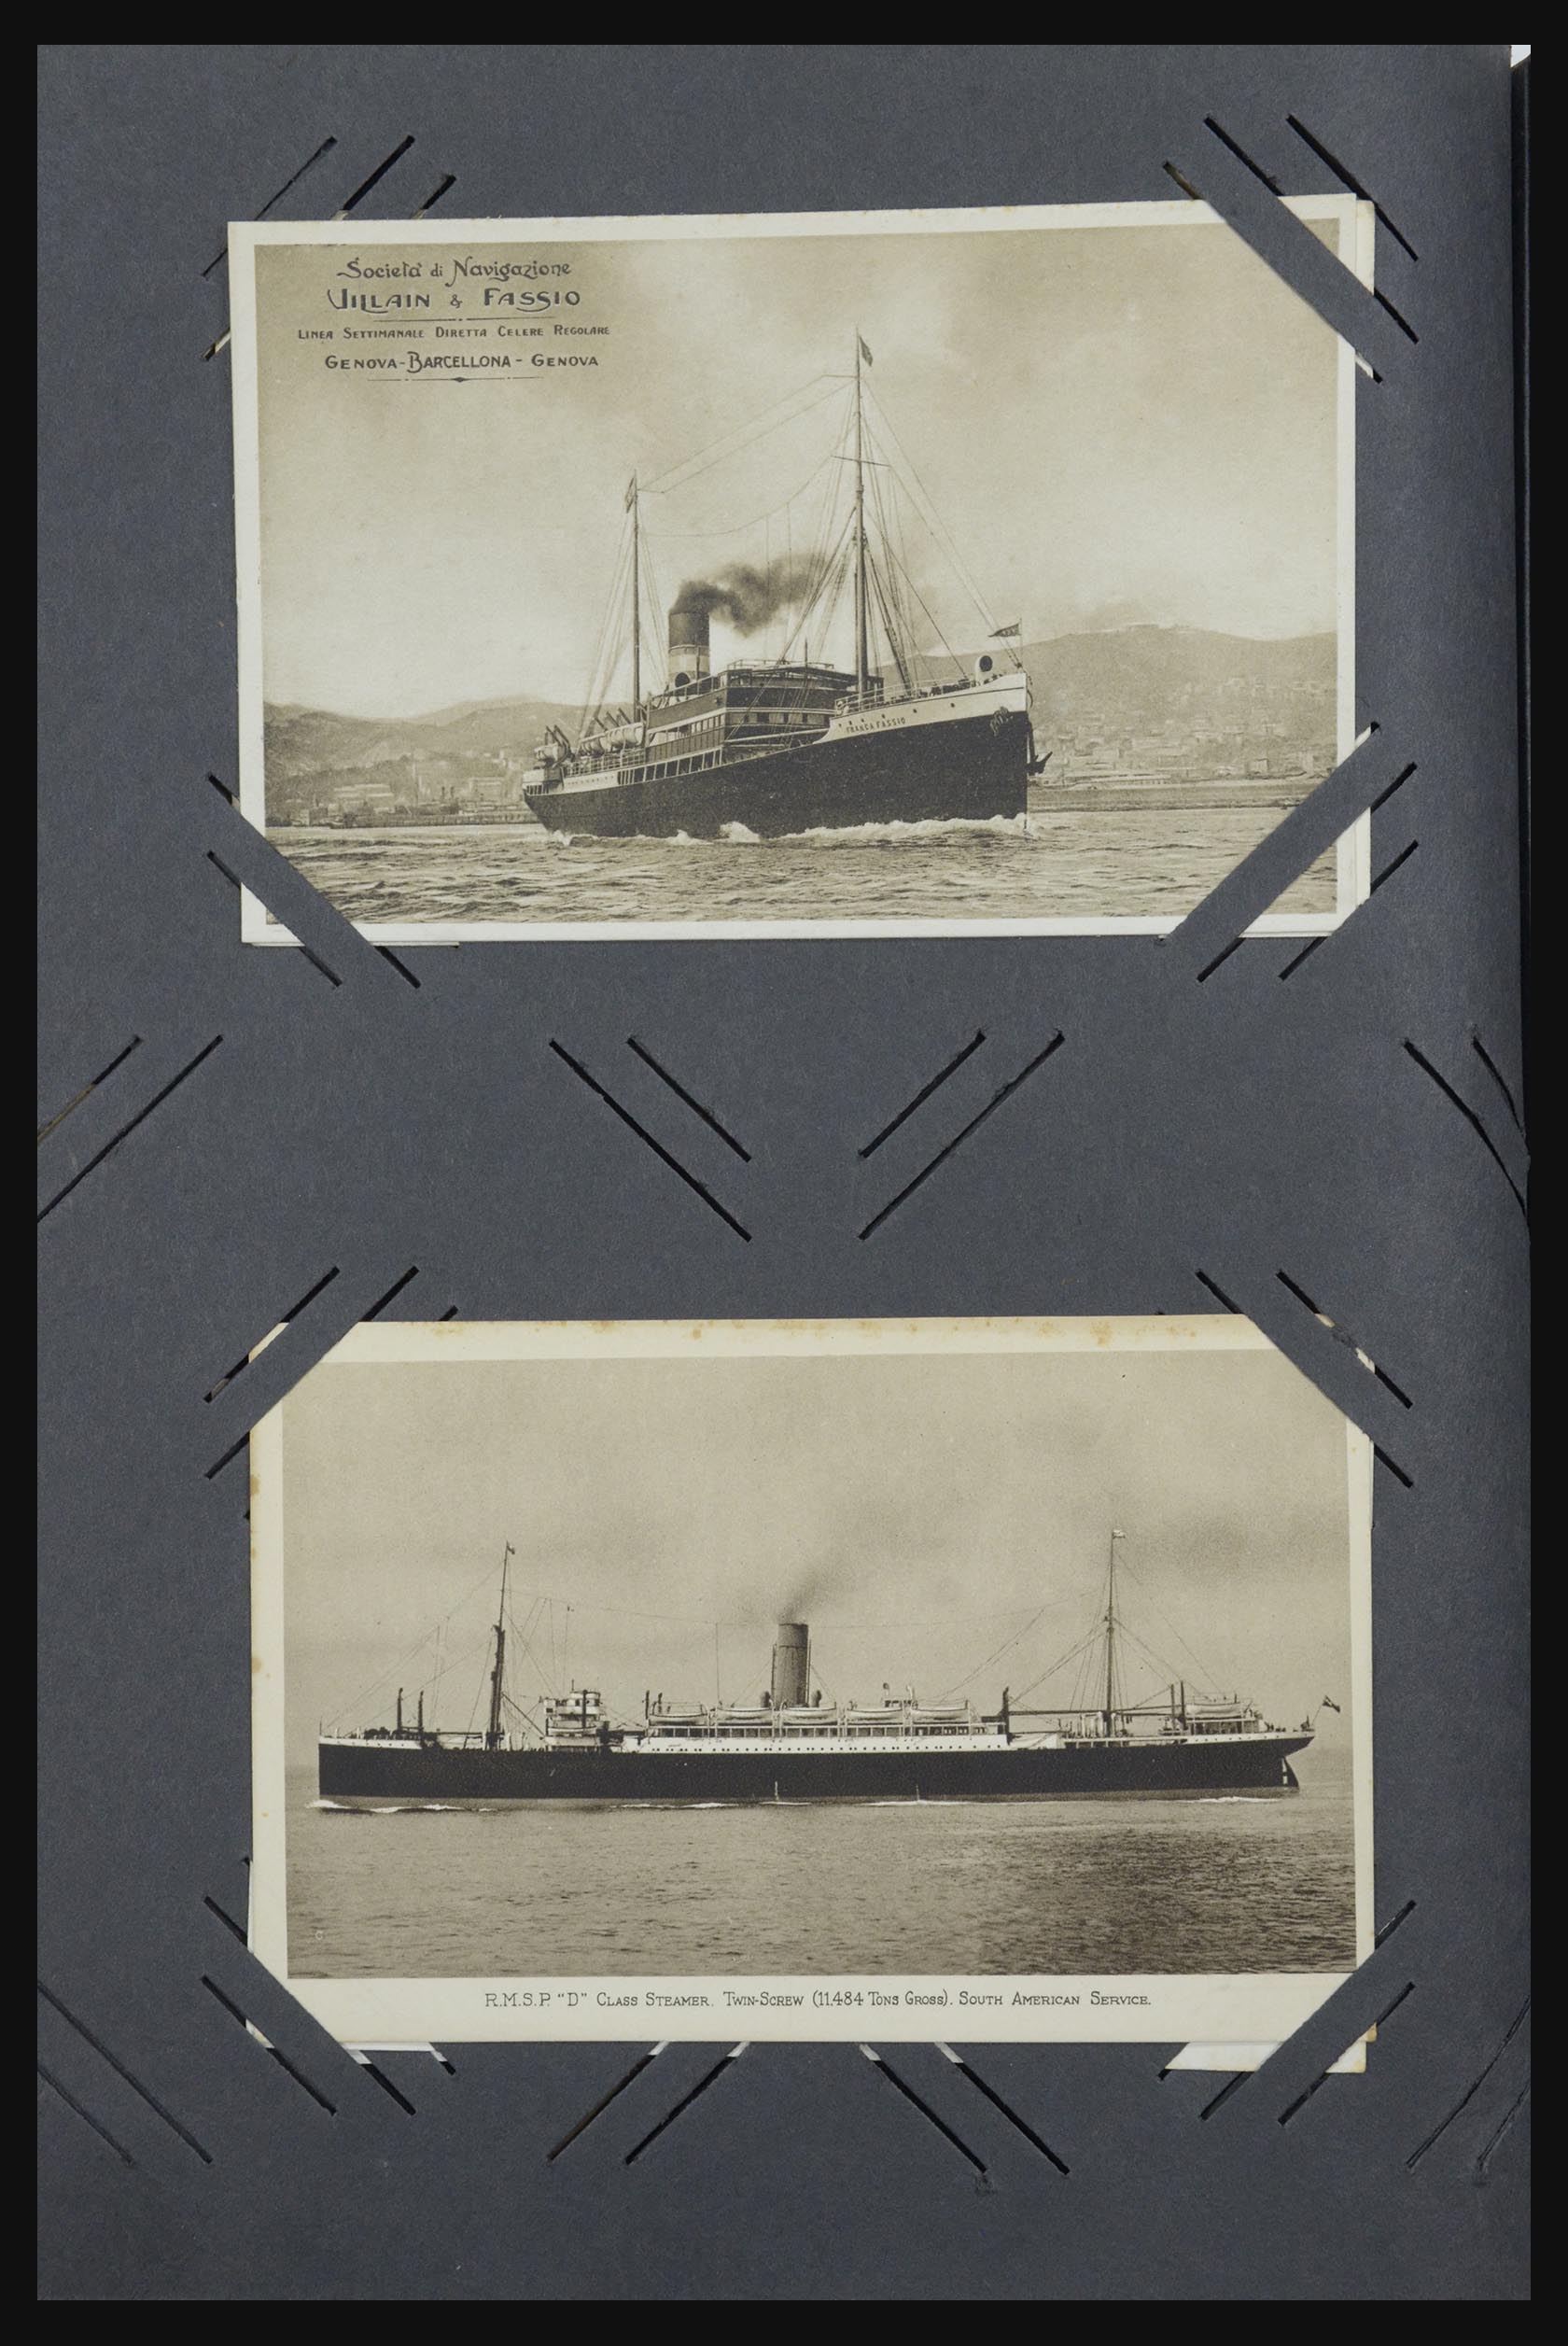 31721 032 - 31721 Thematic: Ships picture postcards 1910-1940.